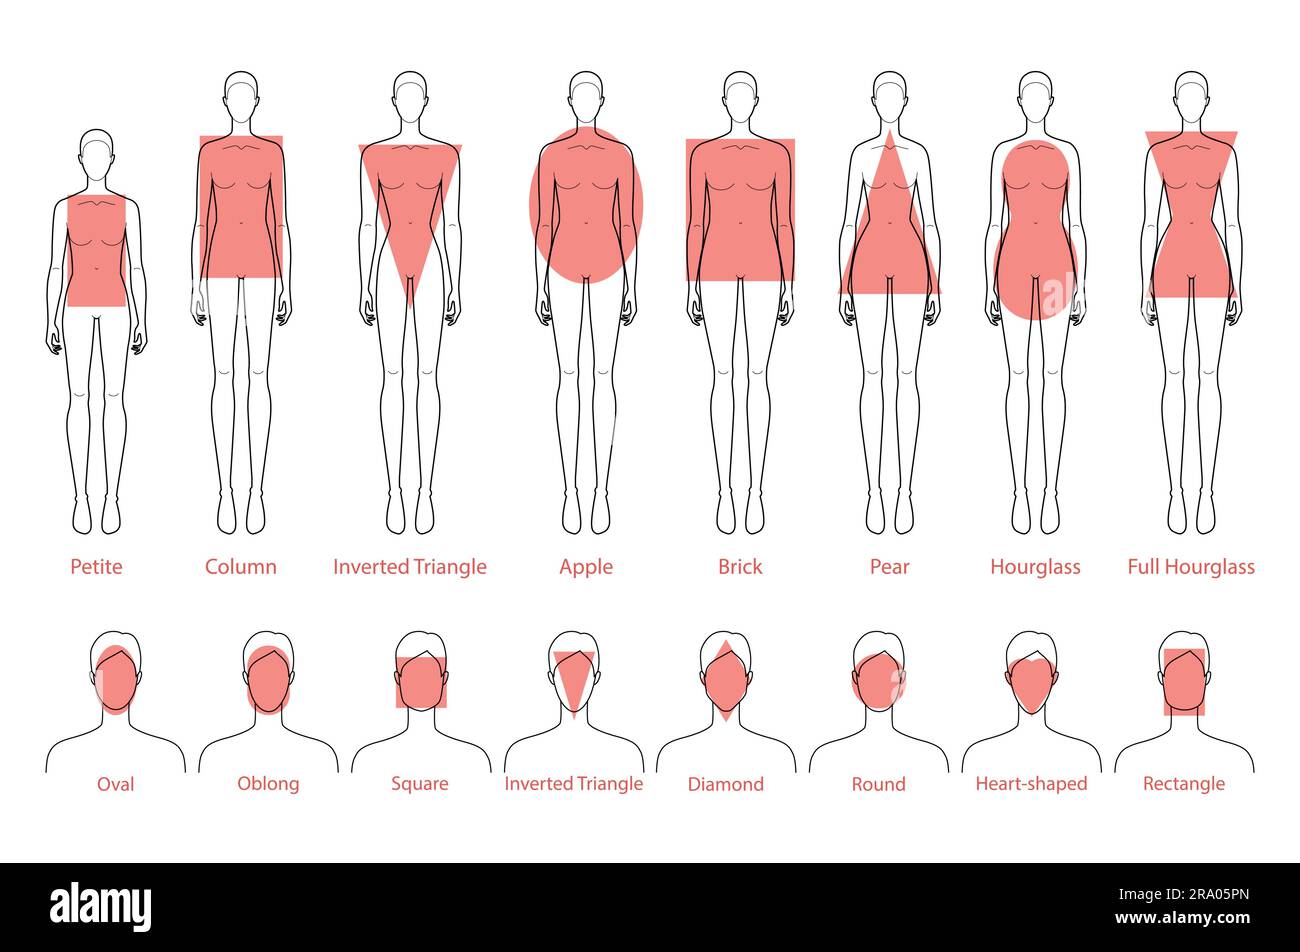 Set of Women face and body shape types - oval, oblong, square, triangle,  round, rectangle shape. Female